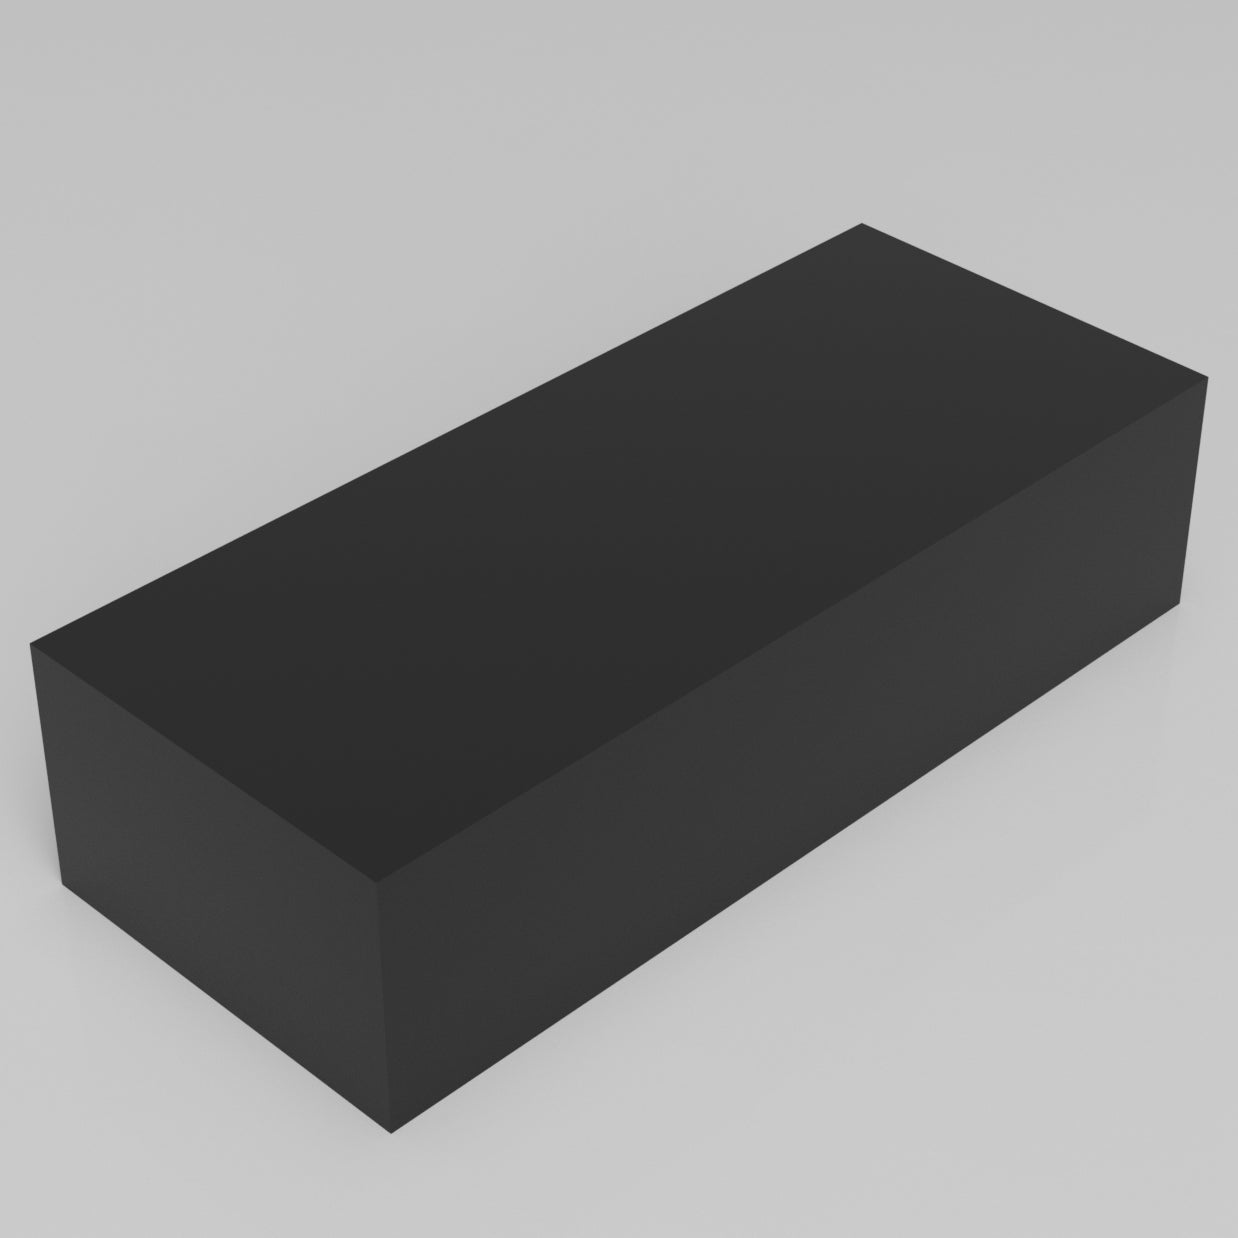 Machinable Wax Rectangular Block Front View 3 Inch by 5 Inch by 12 Inch